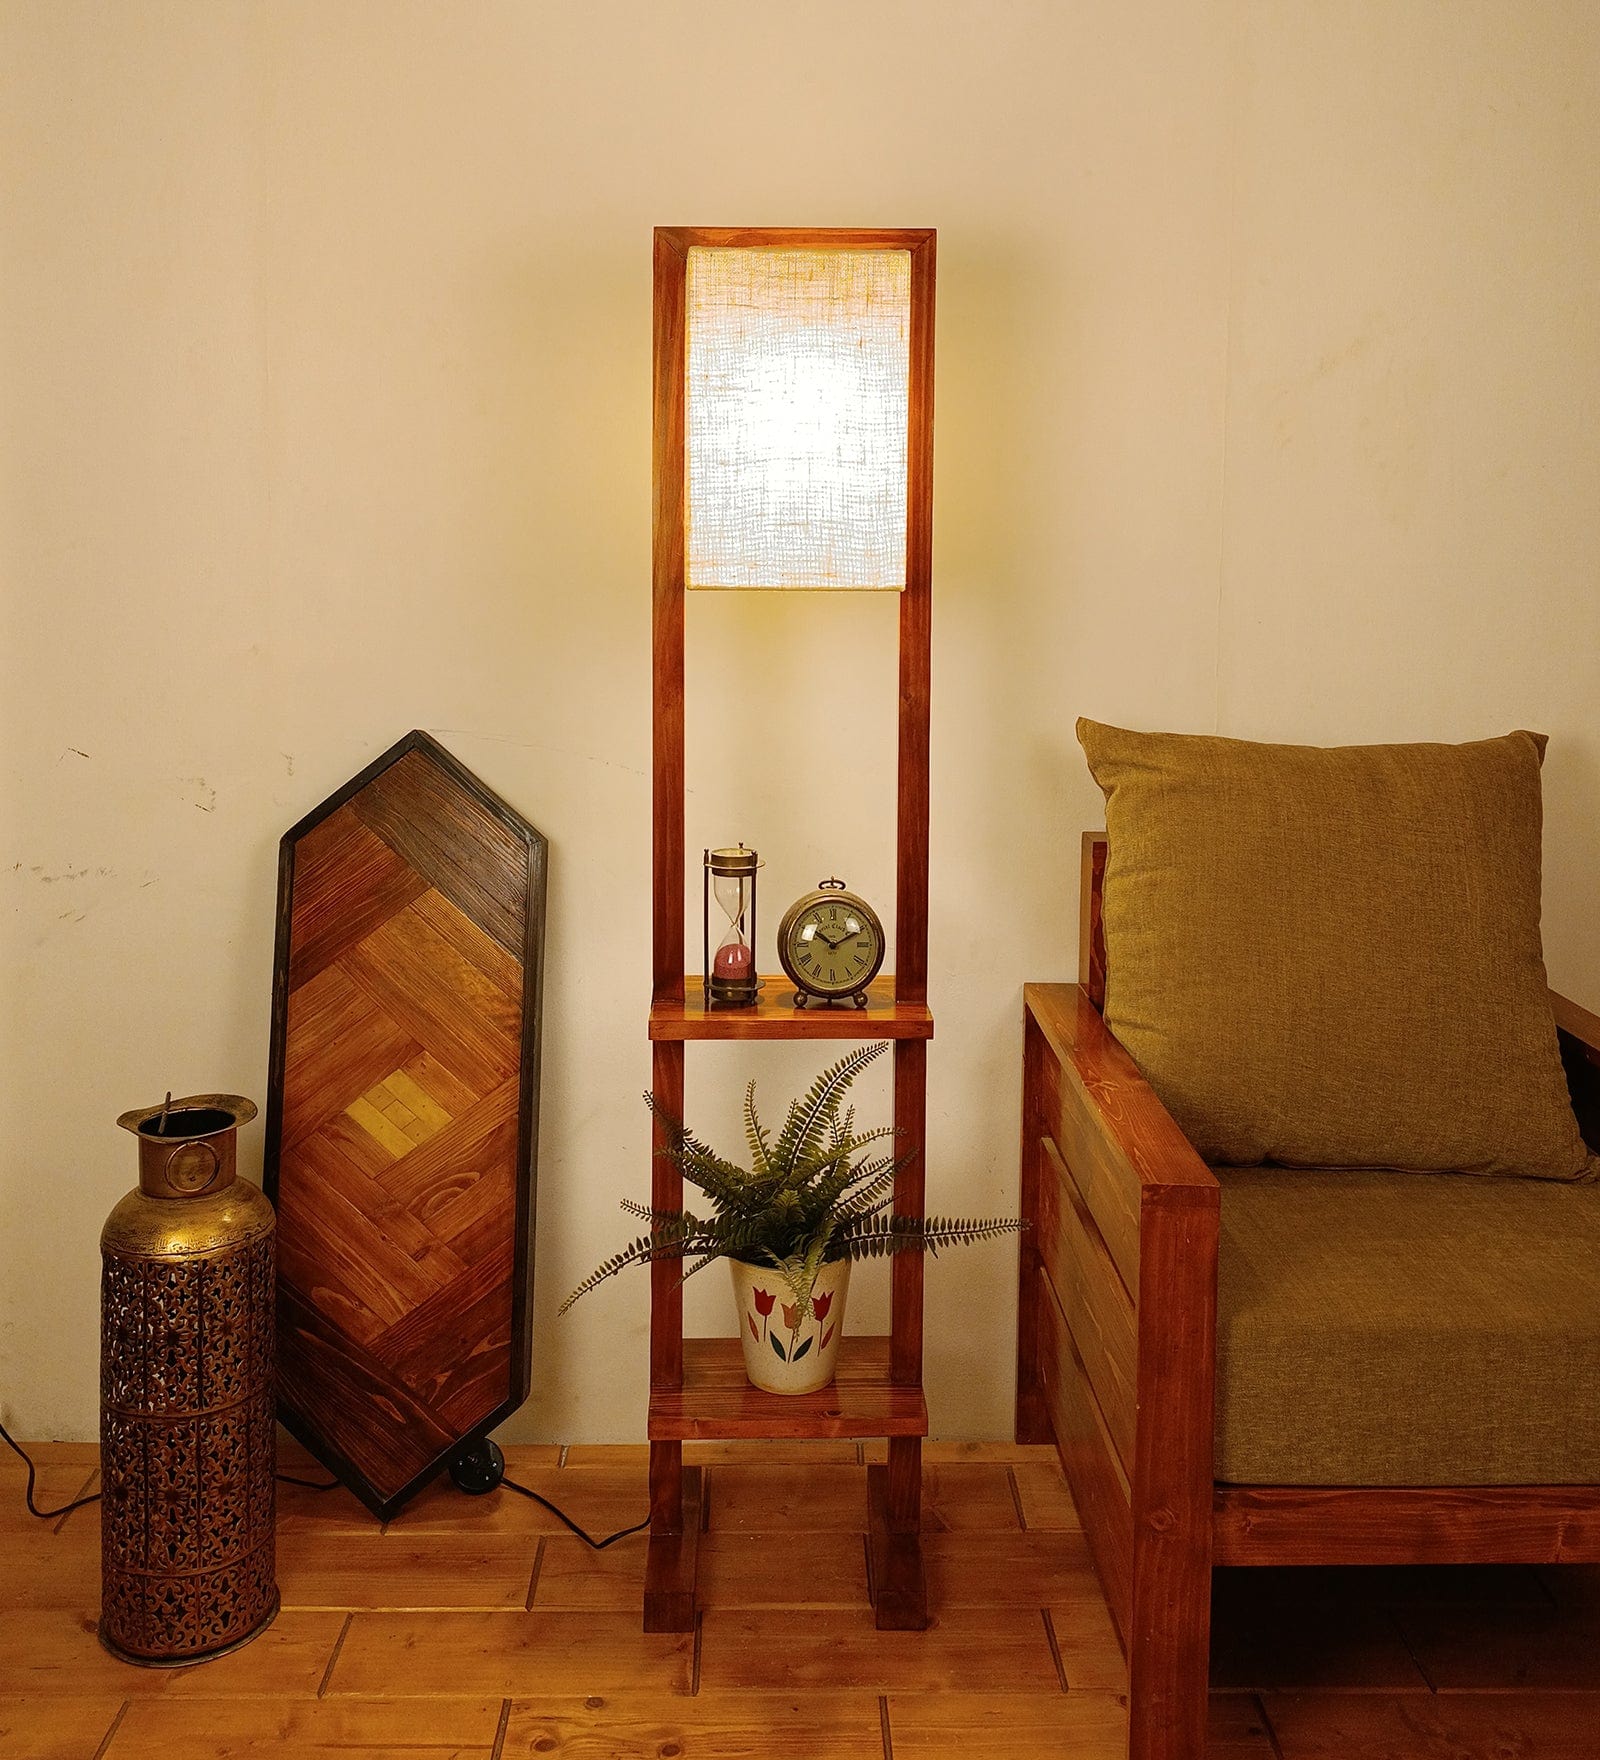 Biped Wooden Floor Lamp with Brown Base and Beige Fabric Lampshade (BULB NOT INCLUDED)